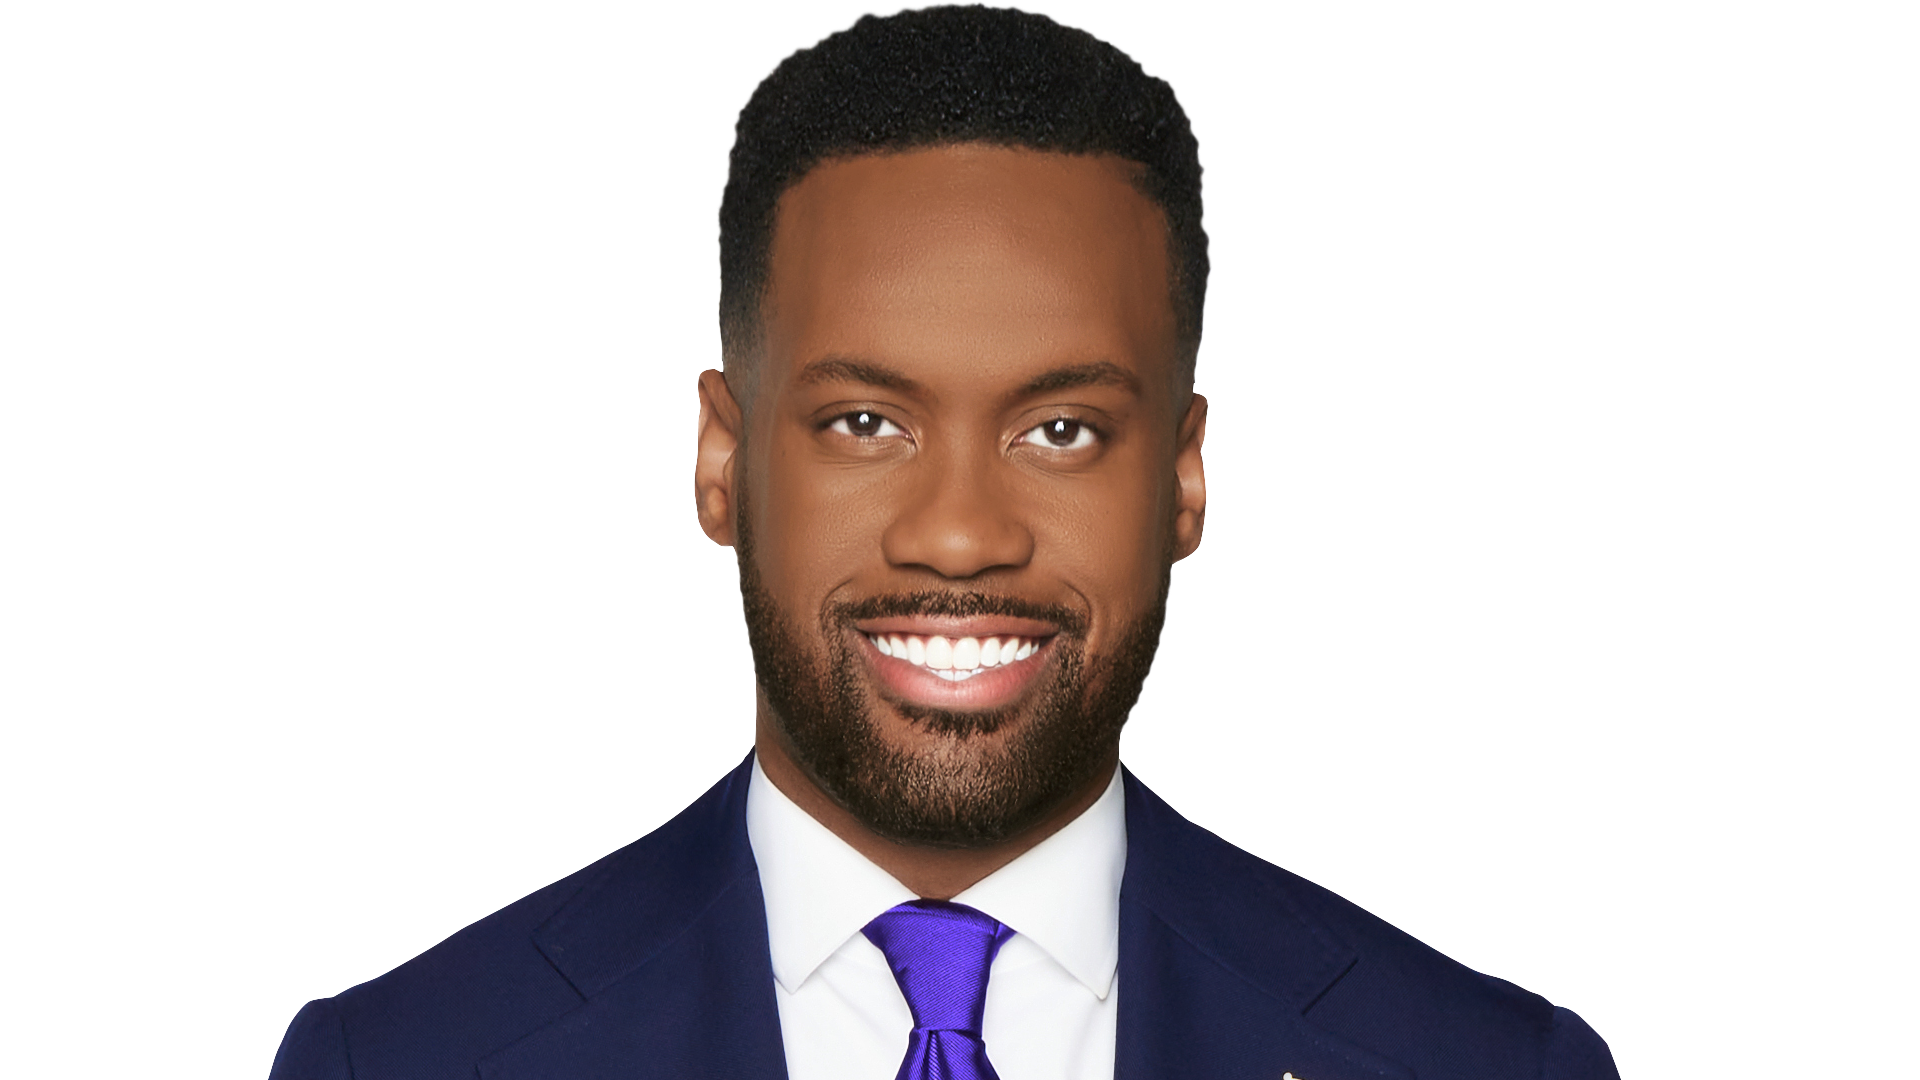 Lawrence Jones joins ‘FOX & Friends’ on permanent basis: 'I’m so grateful, humbled'